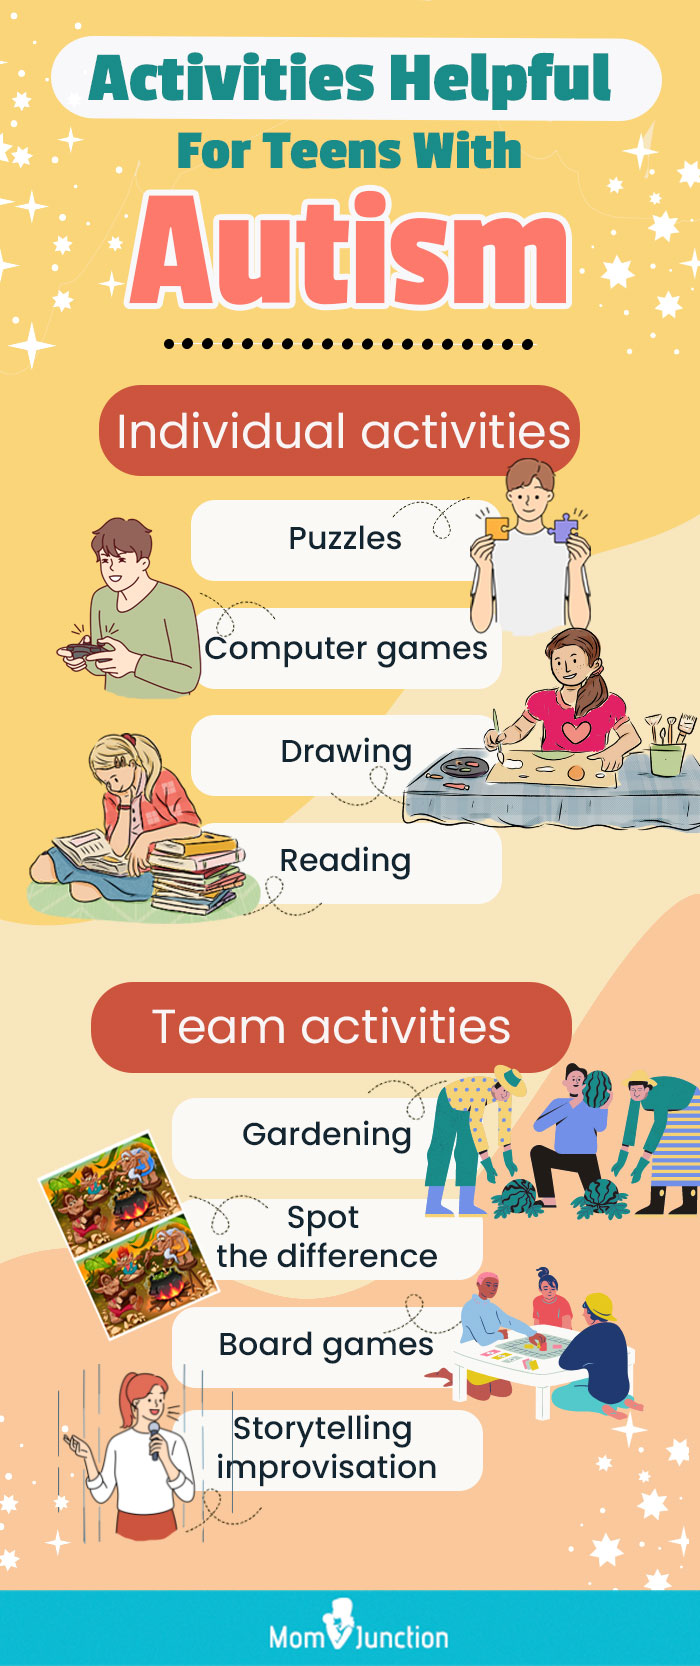 activities helpful for teens with autism (infographic)